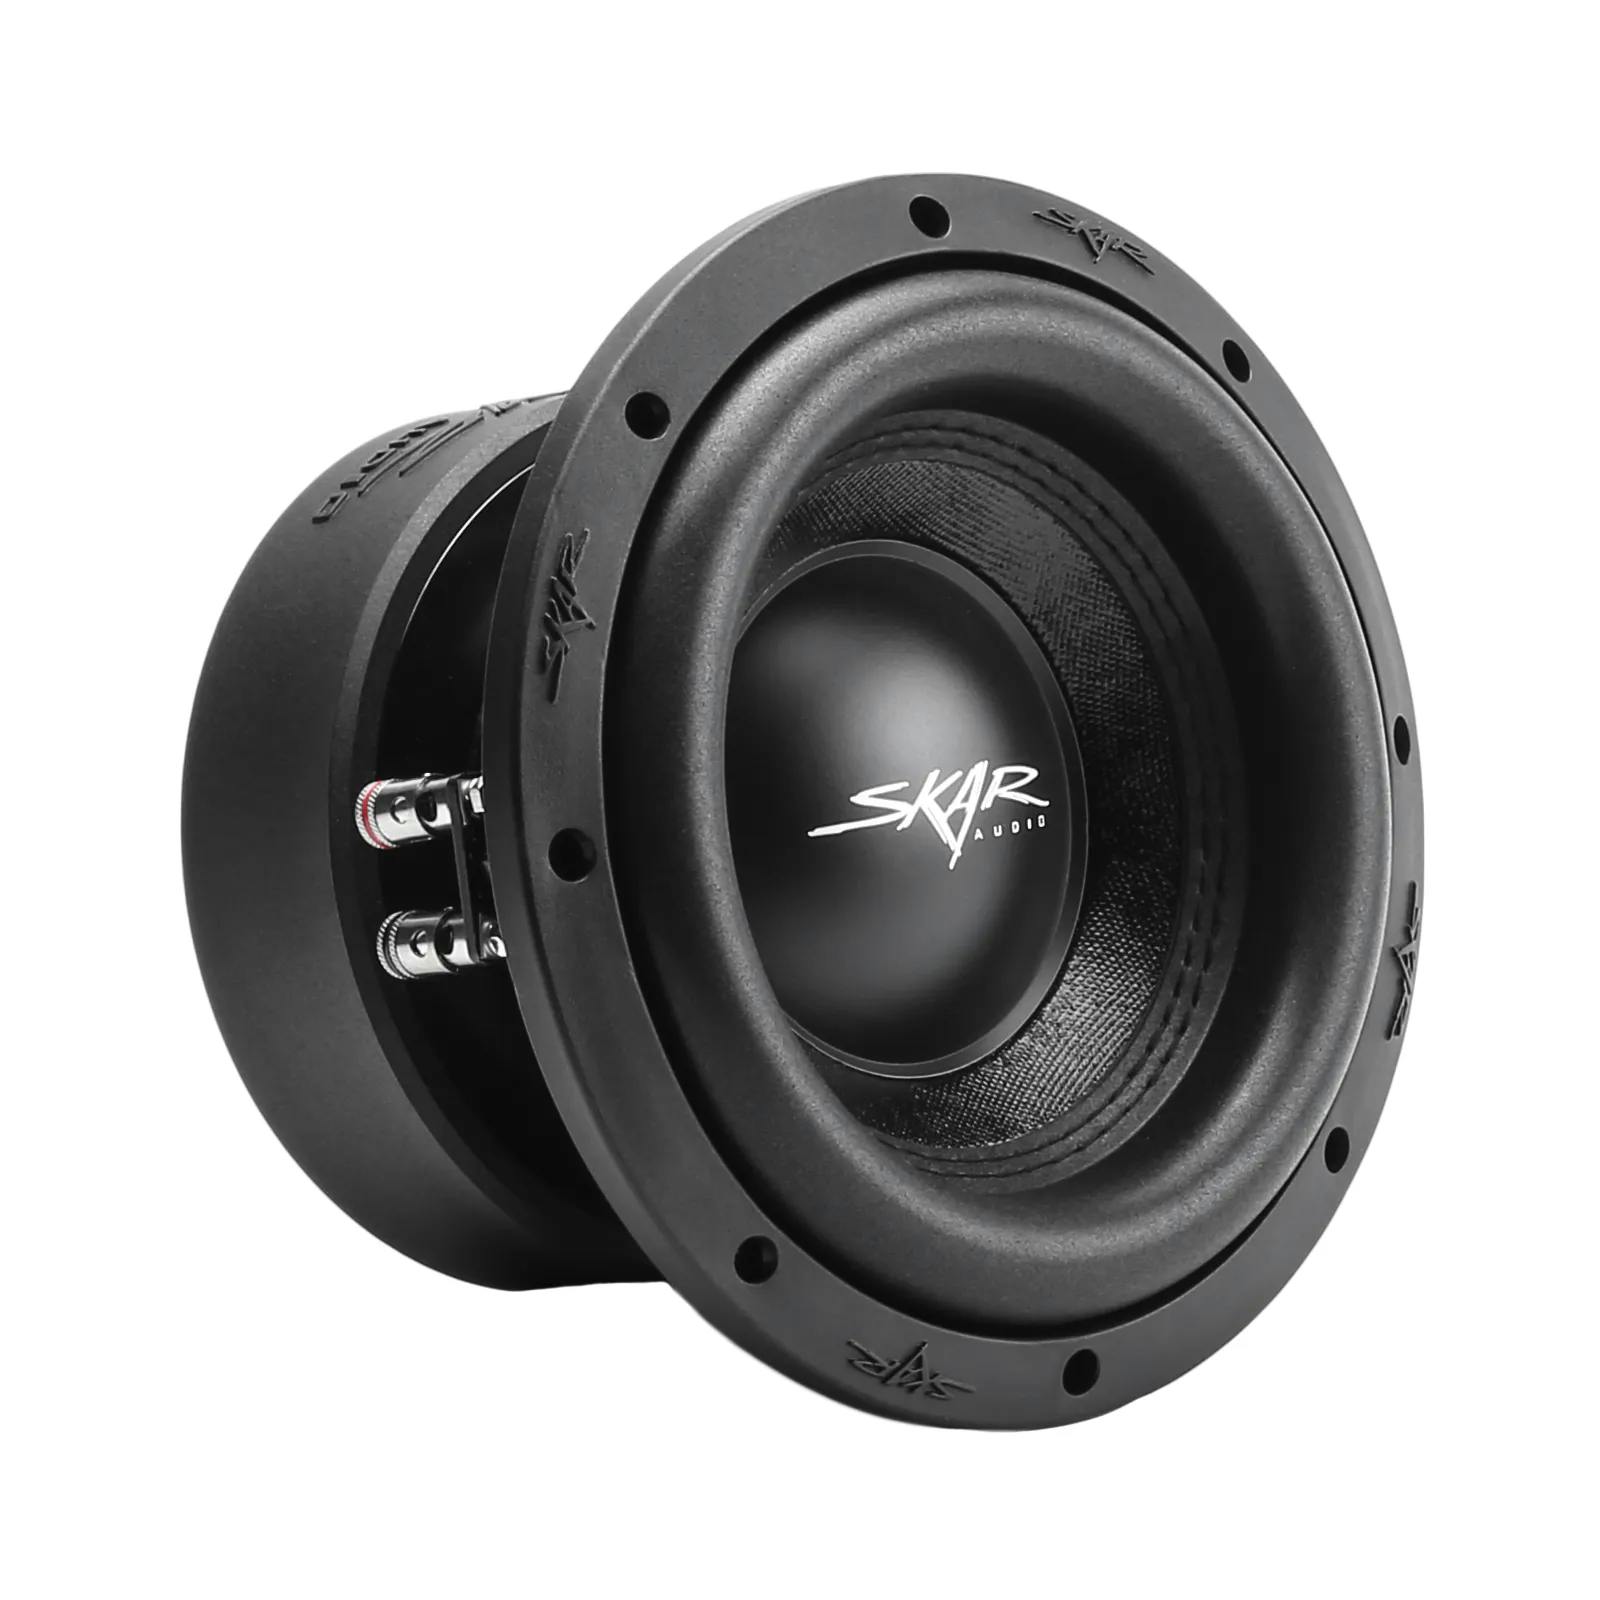 Featured Product Photo for SVR-8 | 8" 800 Watt Max Power Car Subwoofer